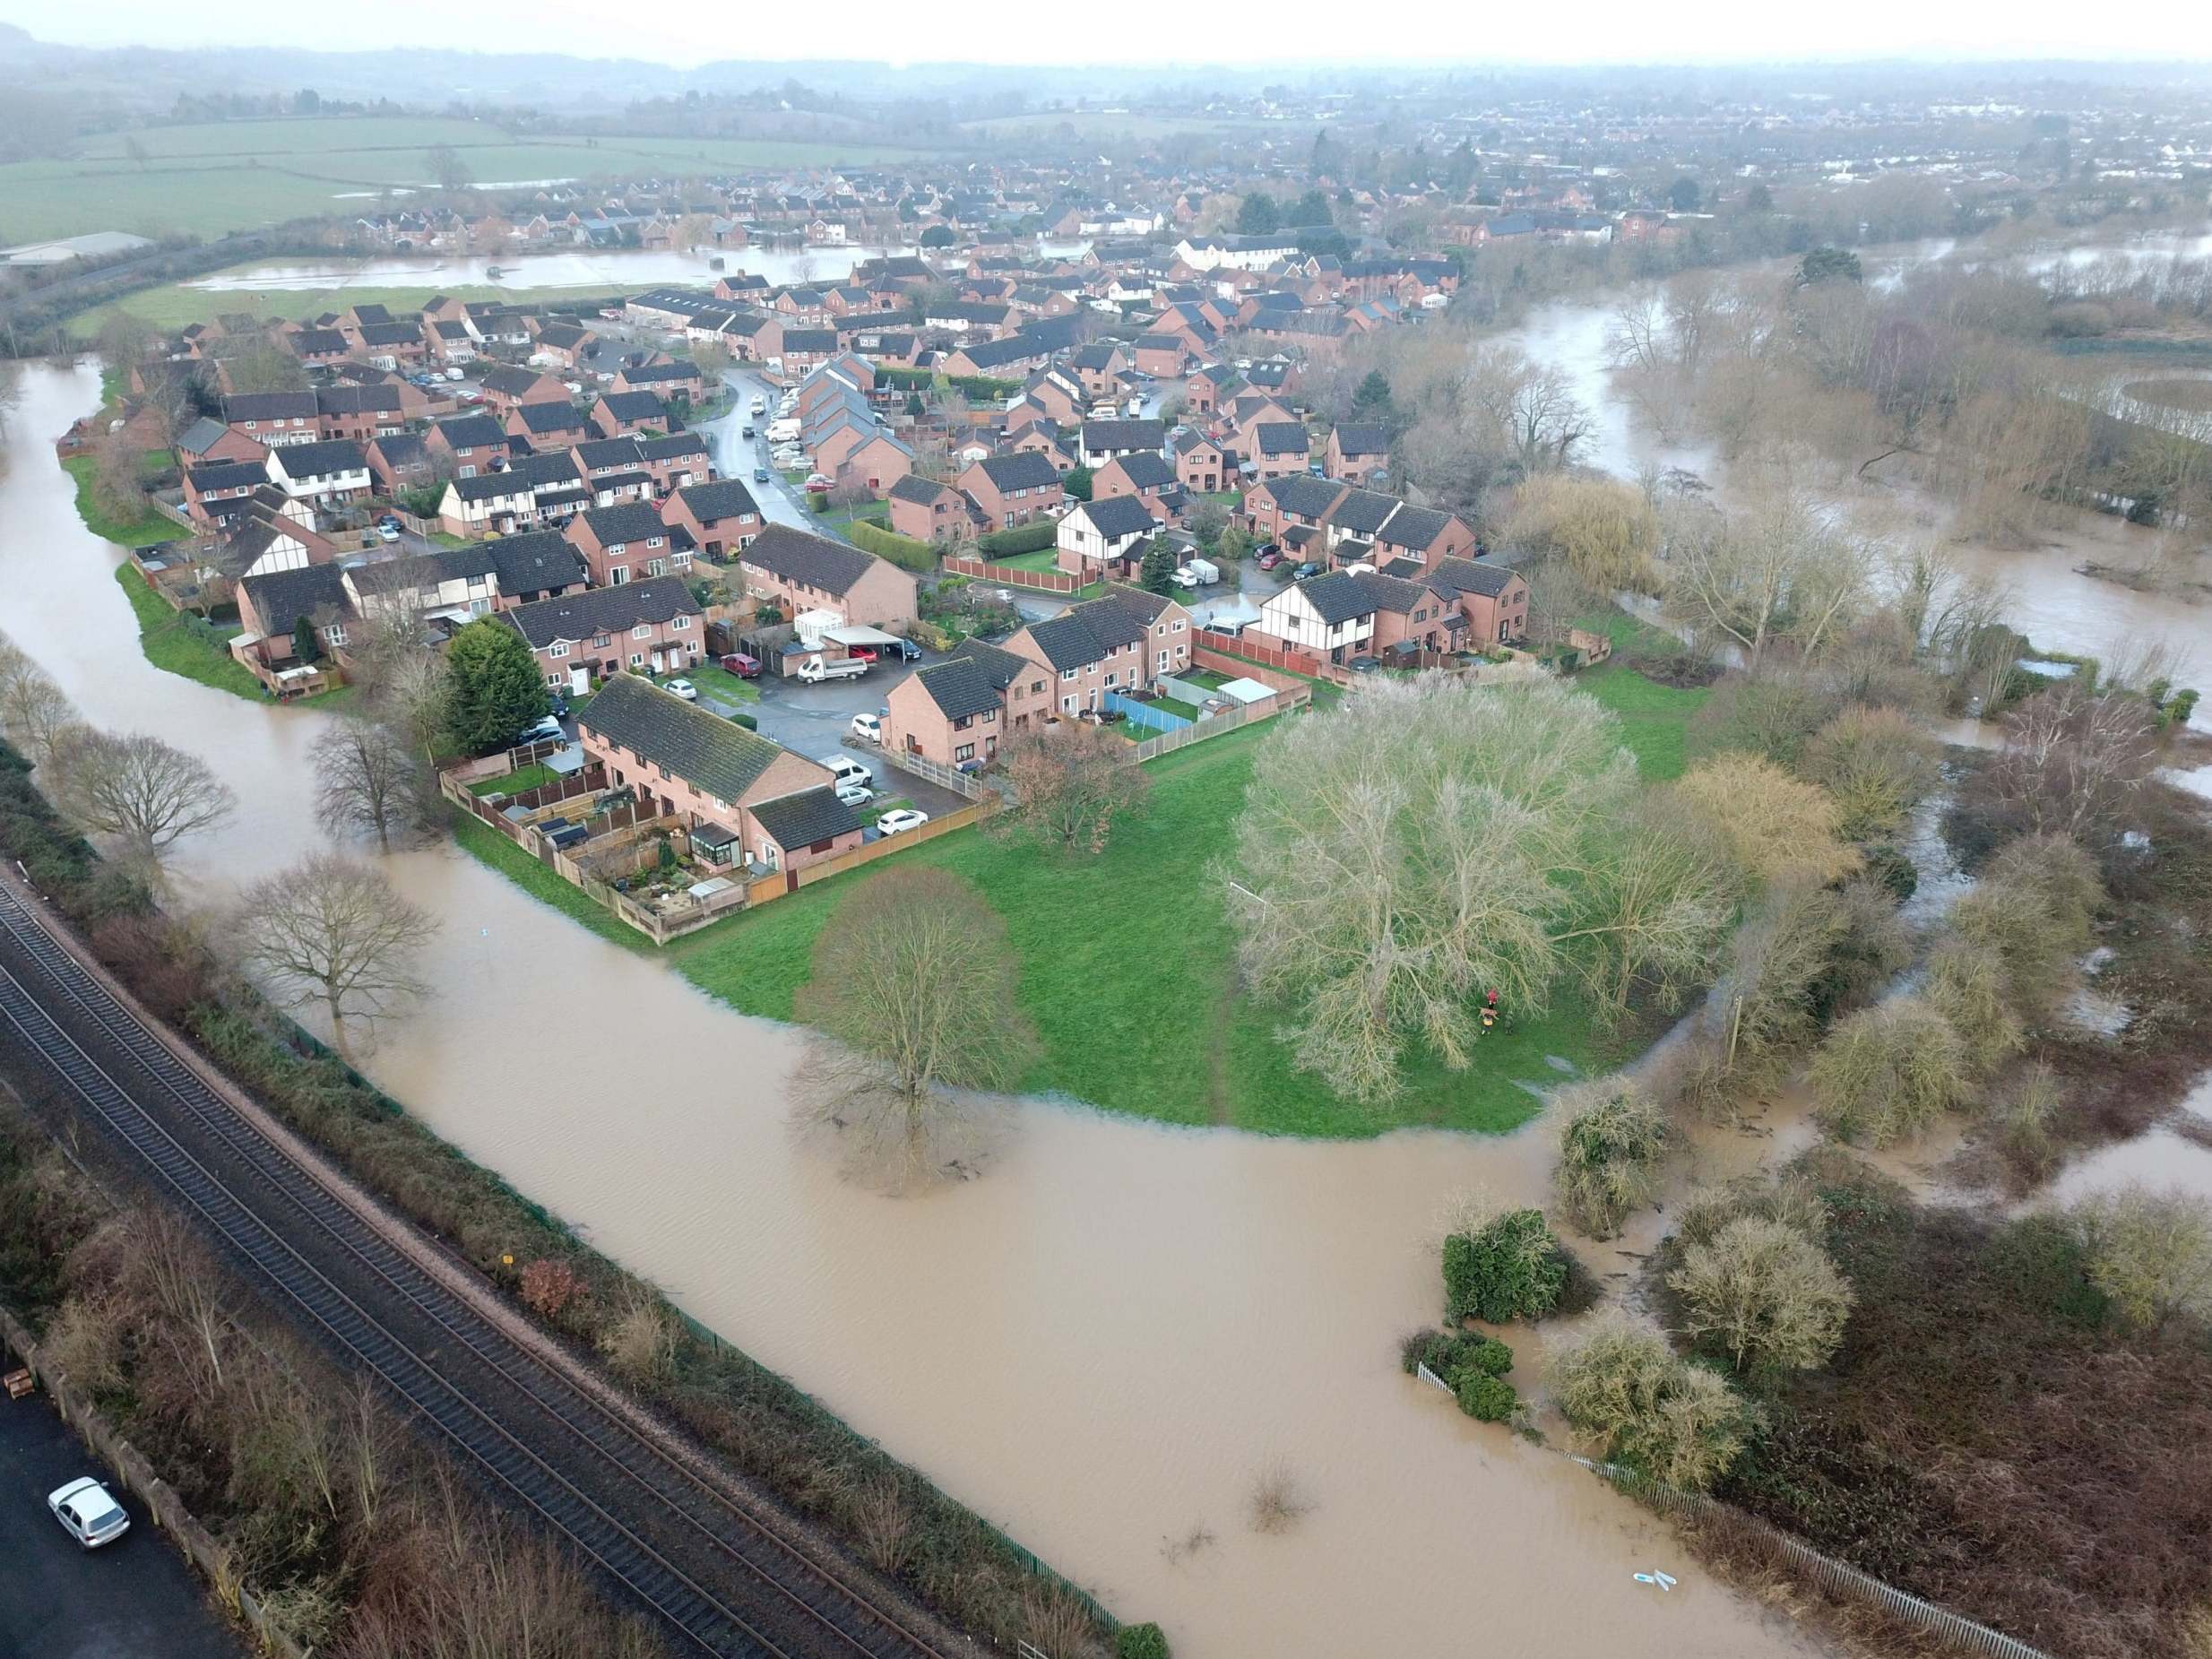 Flooding in Lower Bullingham, Hereford, in the aftermath of Storm Dennis. The Met Office's new supercomputer is intended to help beef up the UK's flood defences